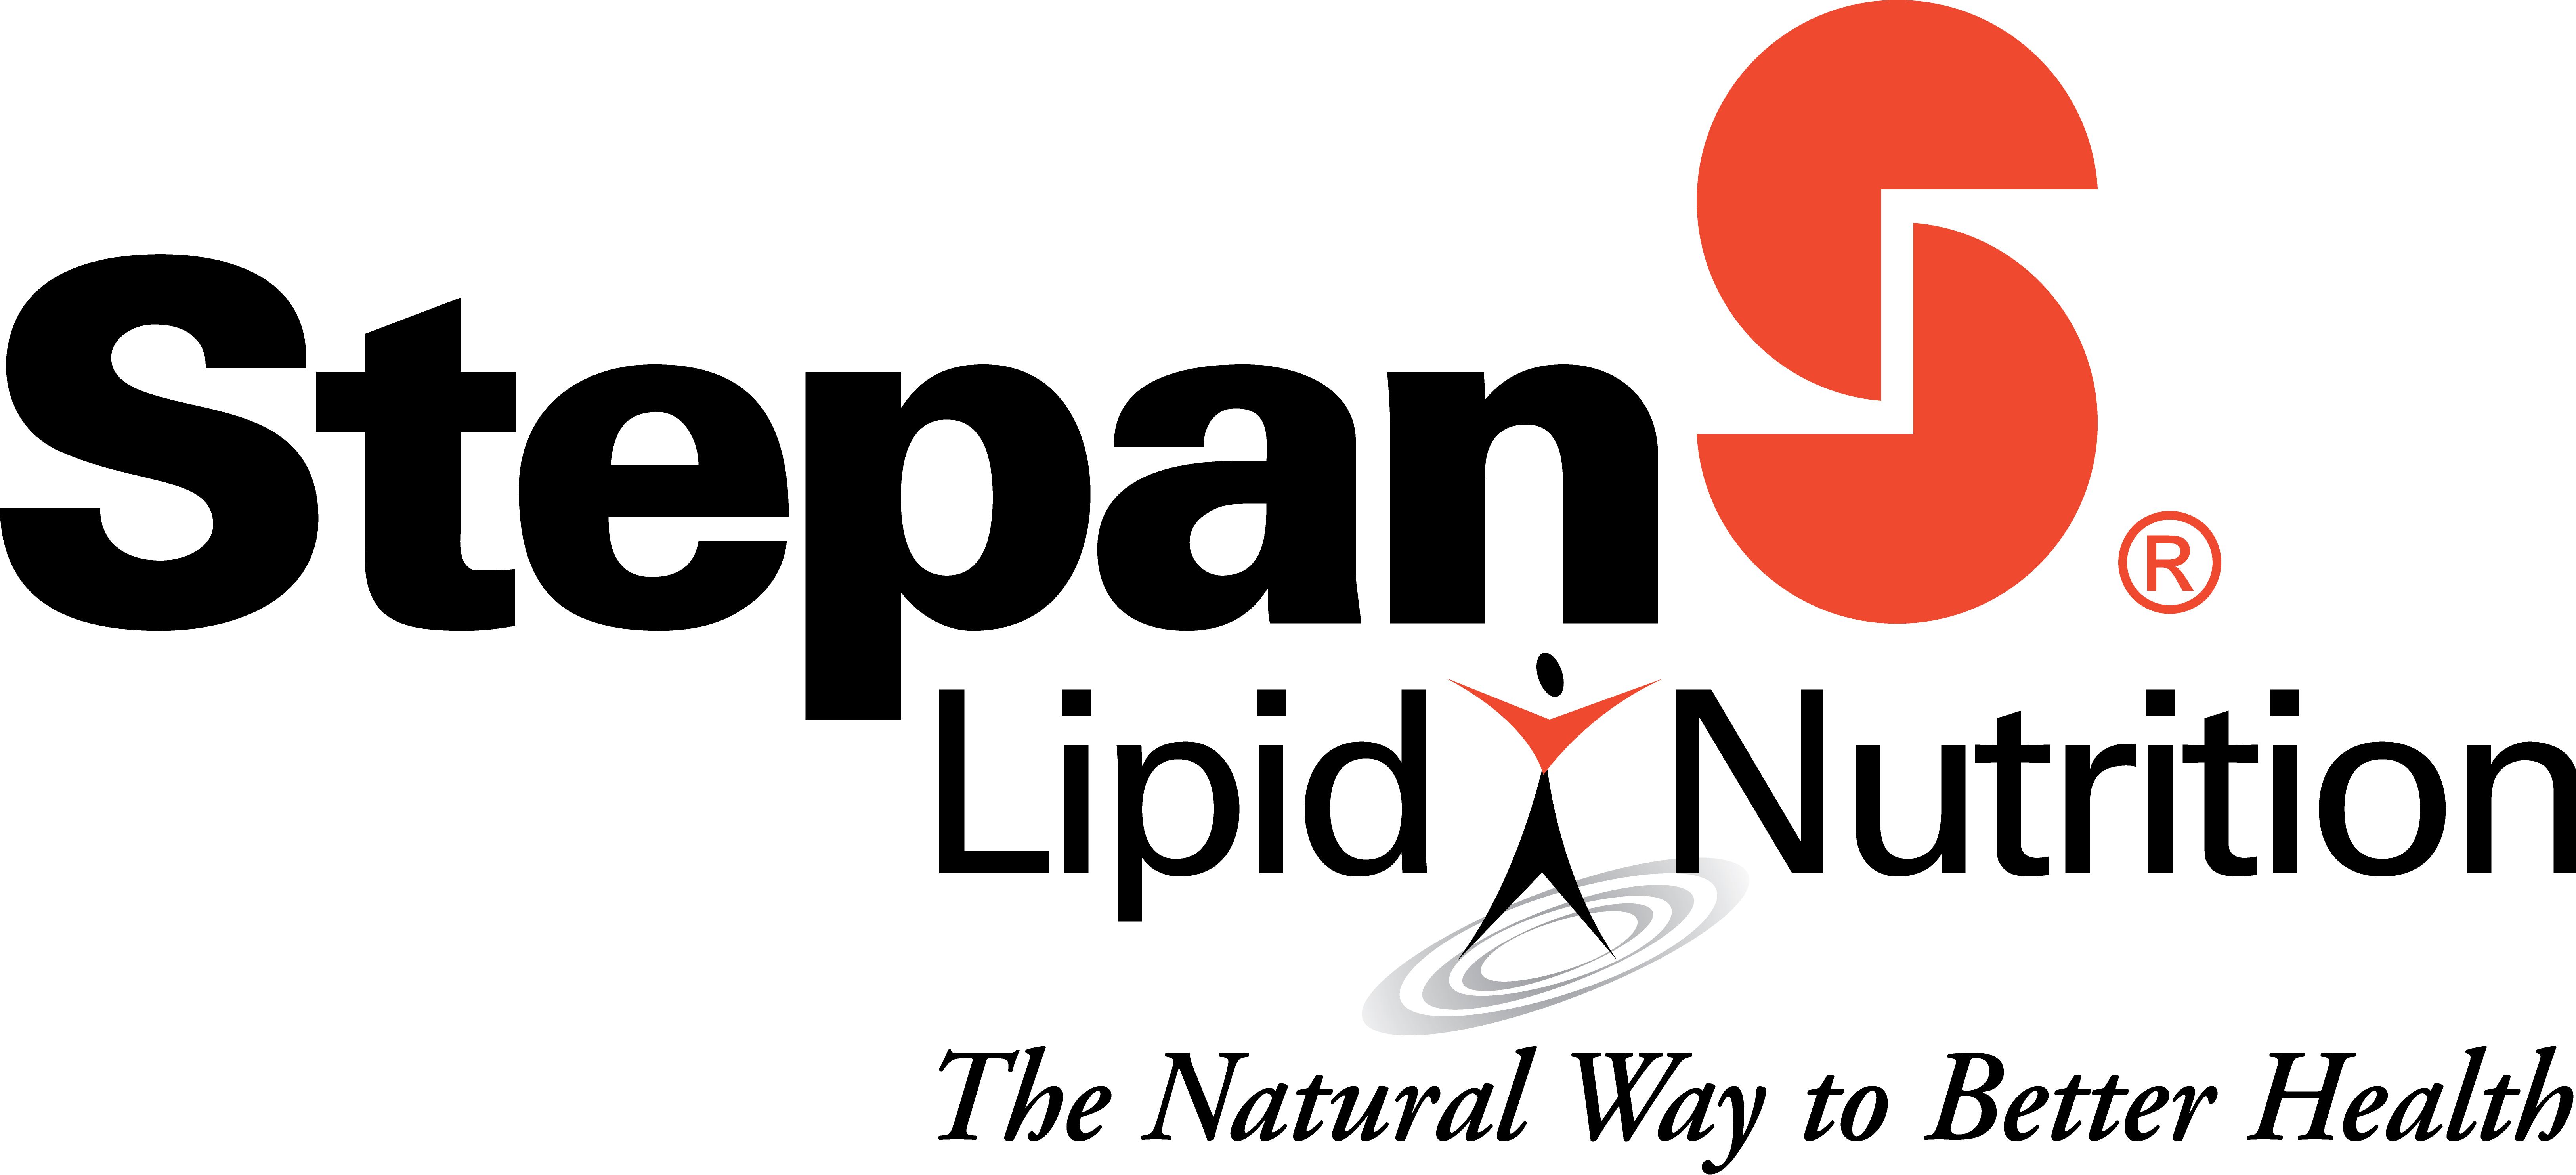 Stepan Company’s Lipid Nutrition business offers food, beverage and dietary supplement manufacturers the opportunity to add value – and nutritional enhancements – to multiple consumer products.